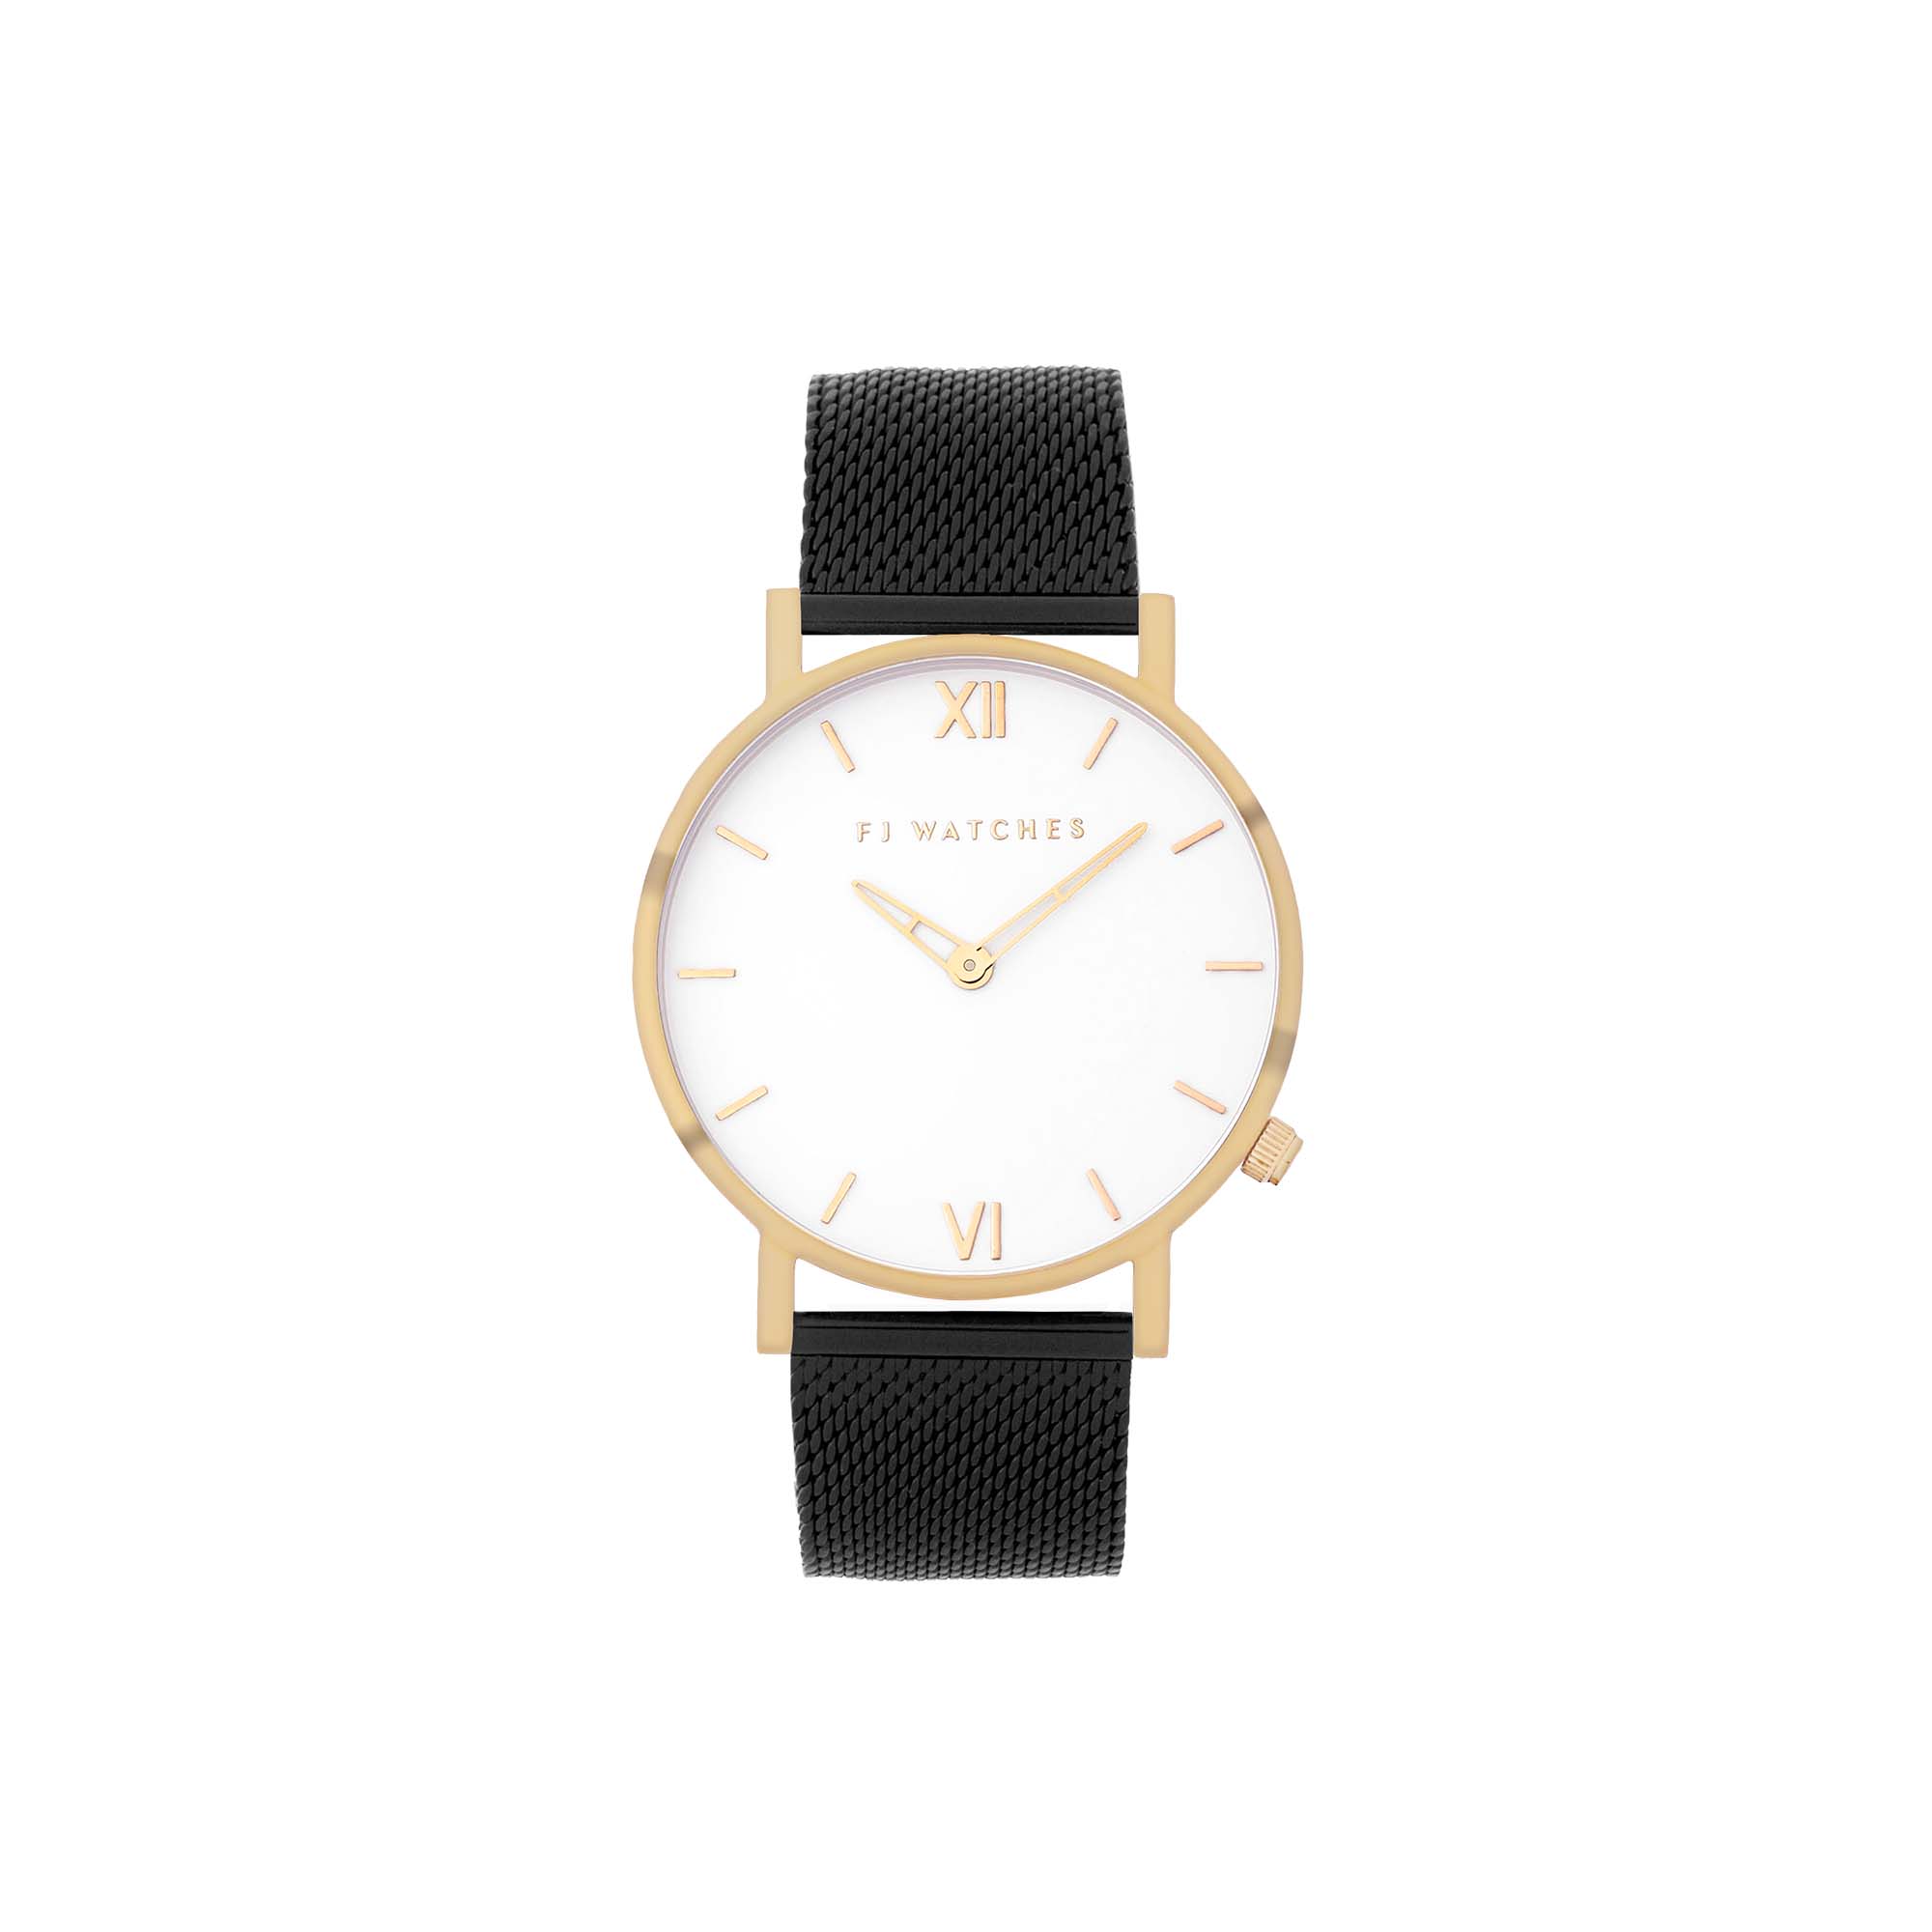 Discover Sunlight, a 42mm men's watch in gold and white signed Five Jwlry. This one is accompanied by a gold or black mesh bracelet.